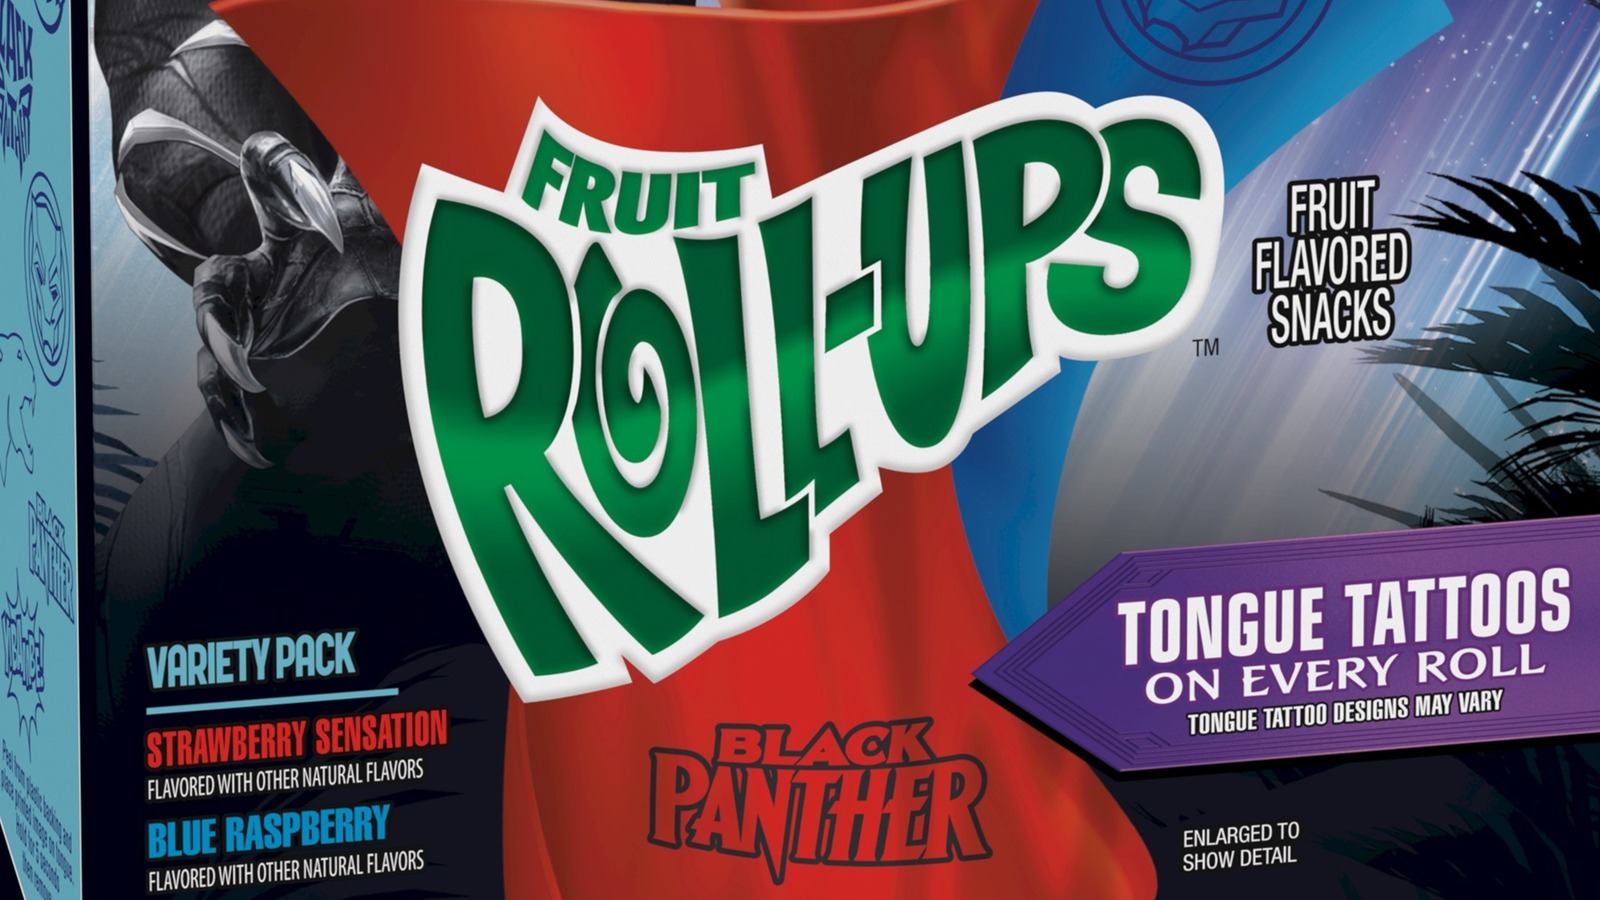 Black Panther Fruit Roll-Ups Will Feature Special Wakanda Tongue Tattoos